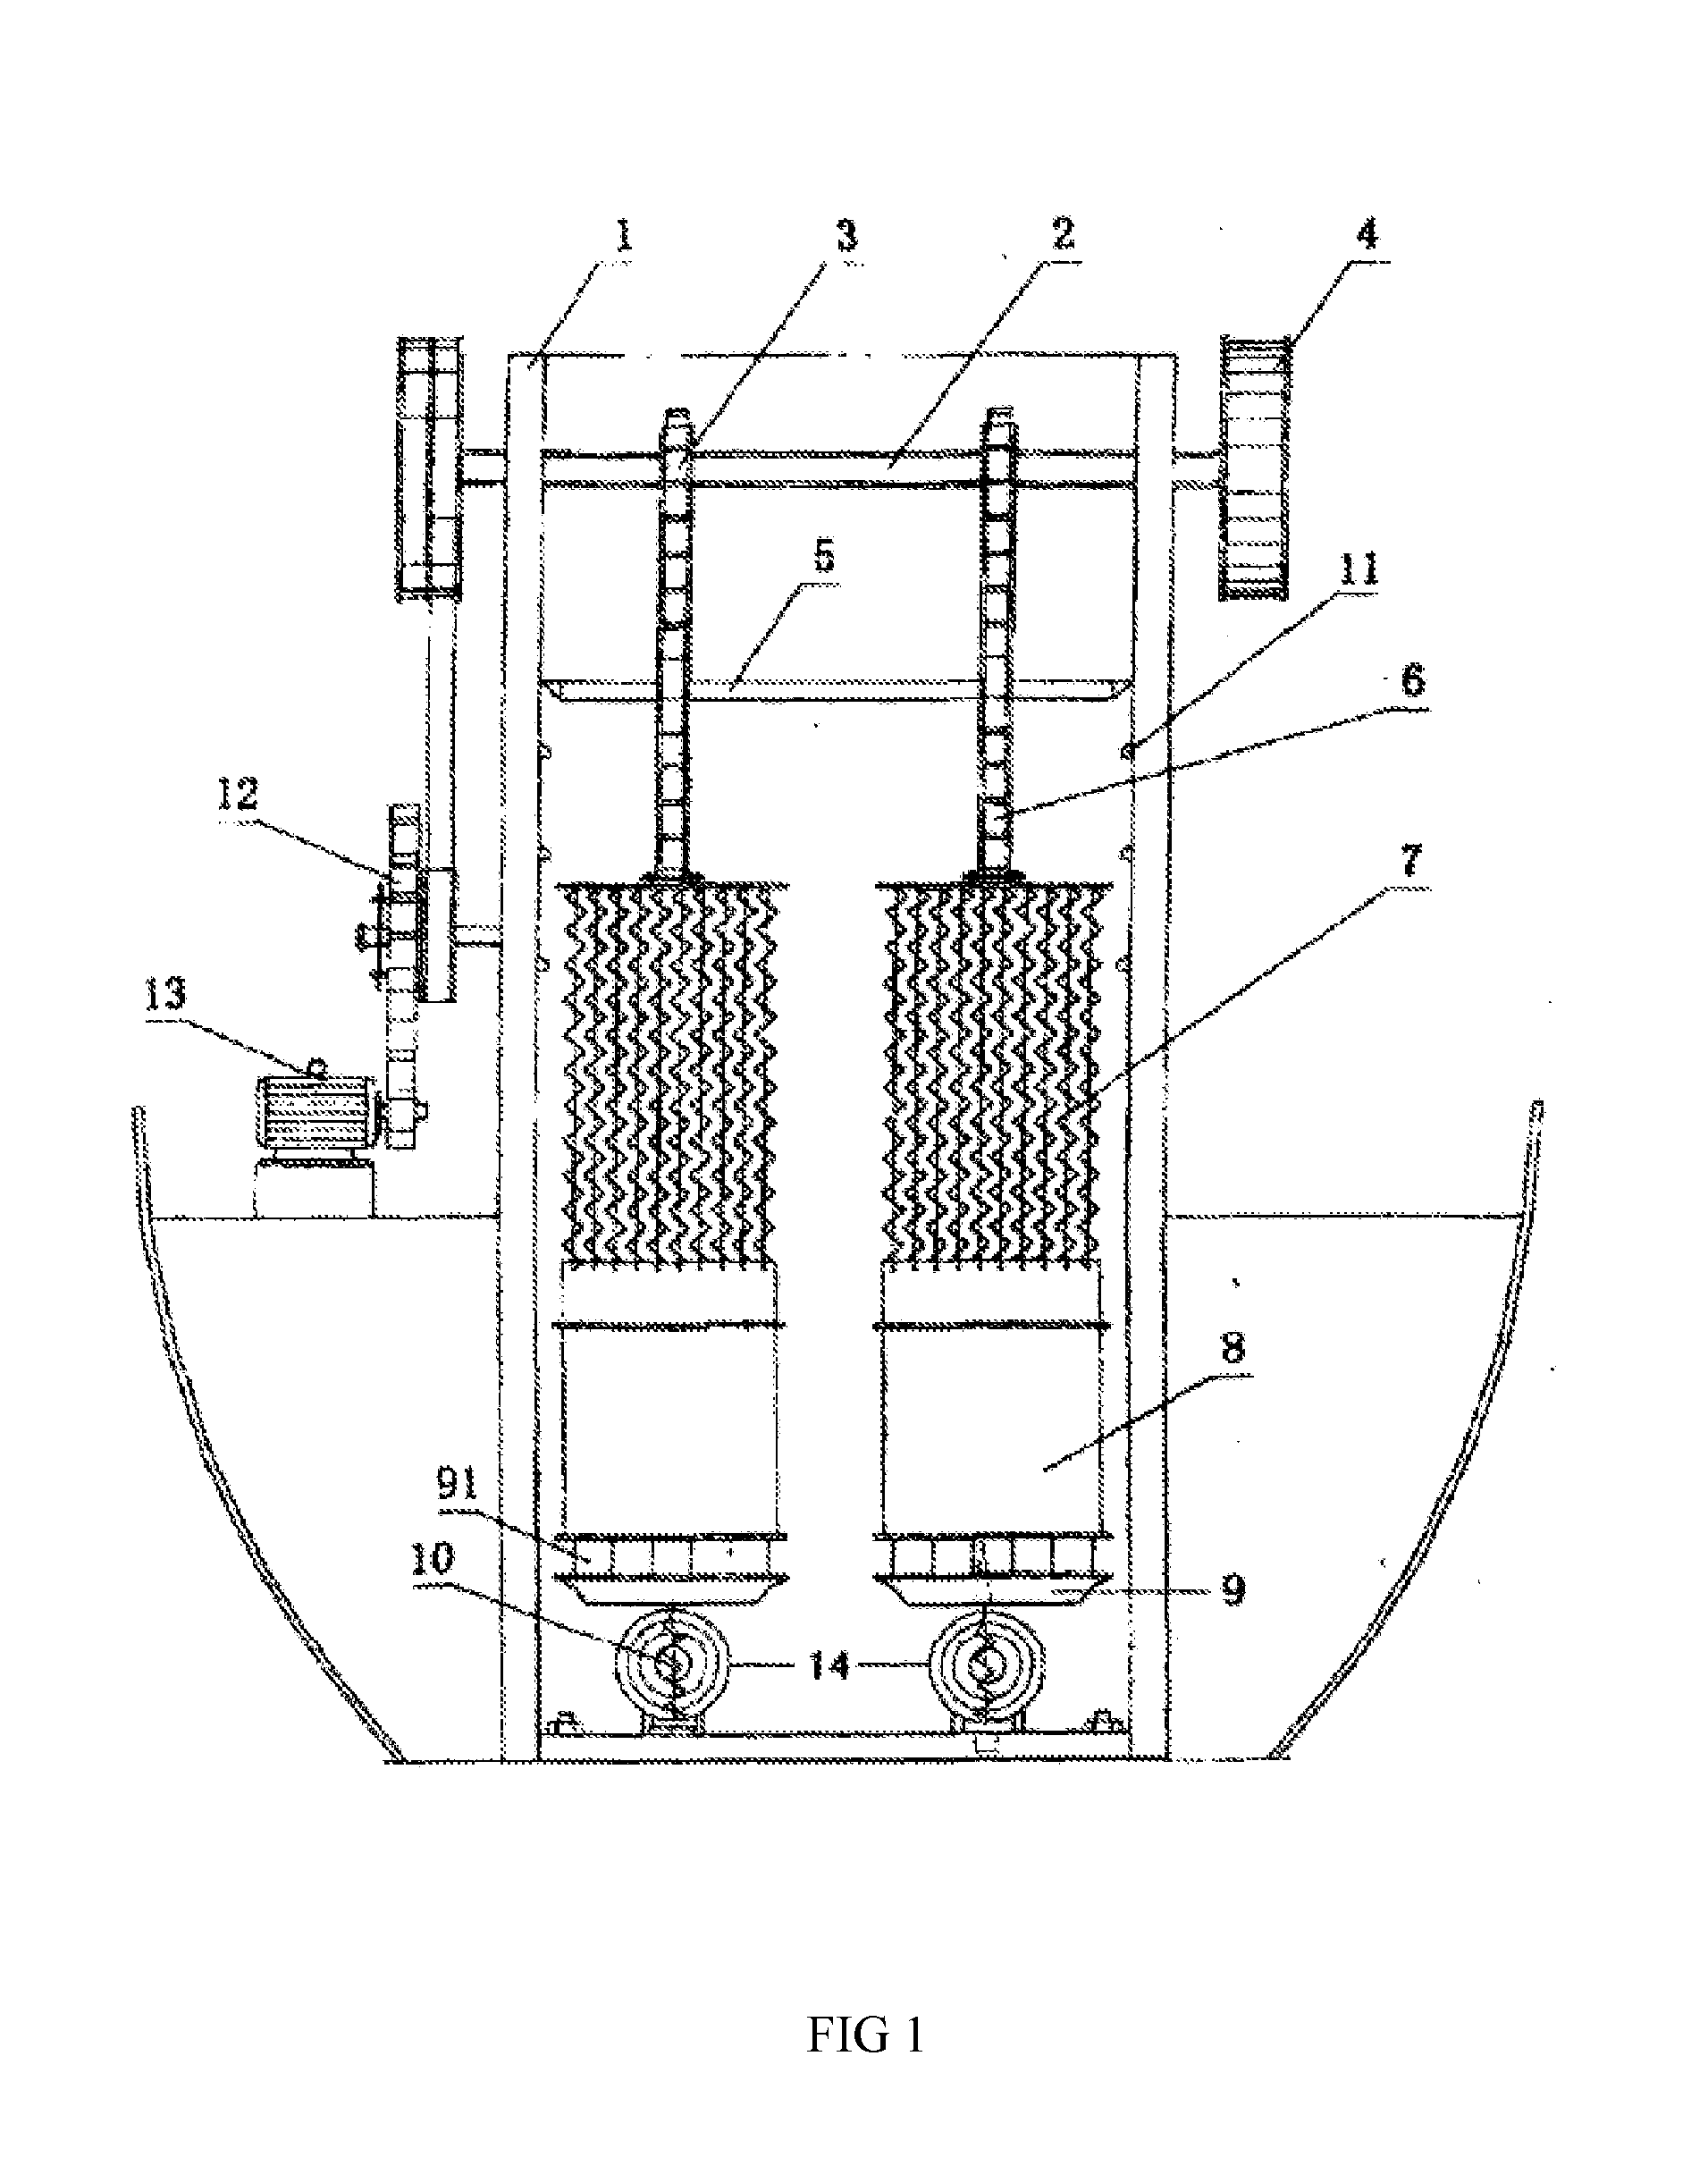 Gravitational energy conversion device and application thereof